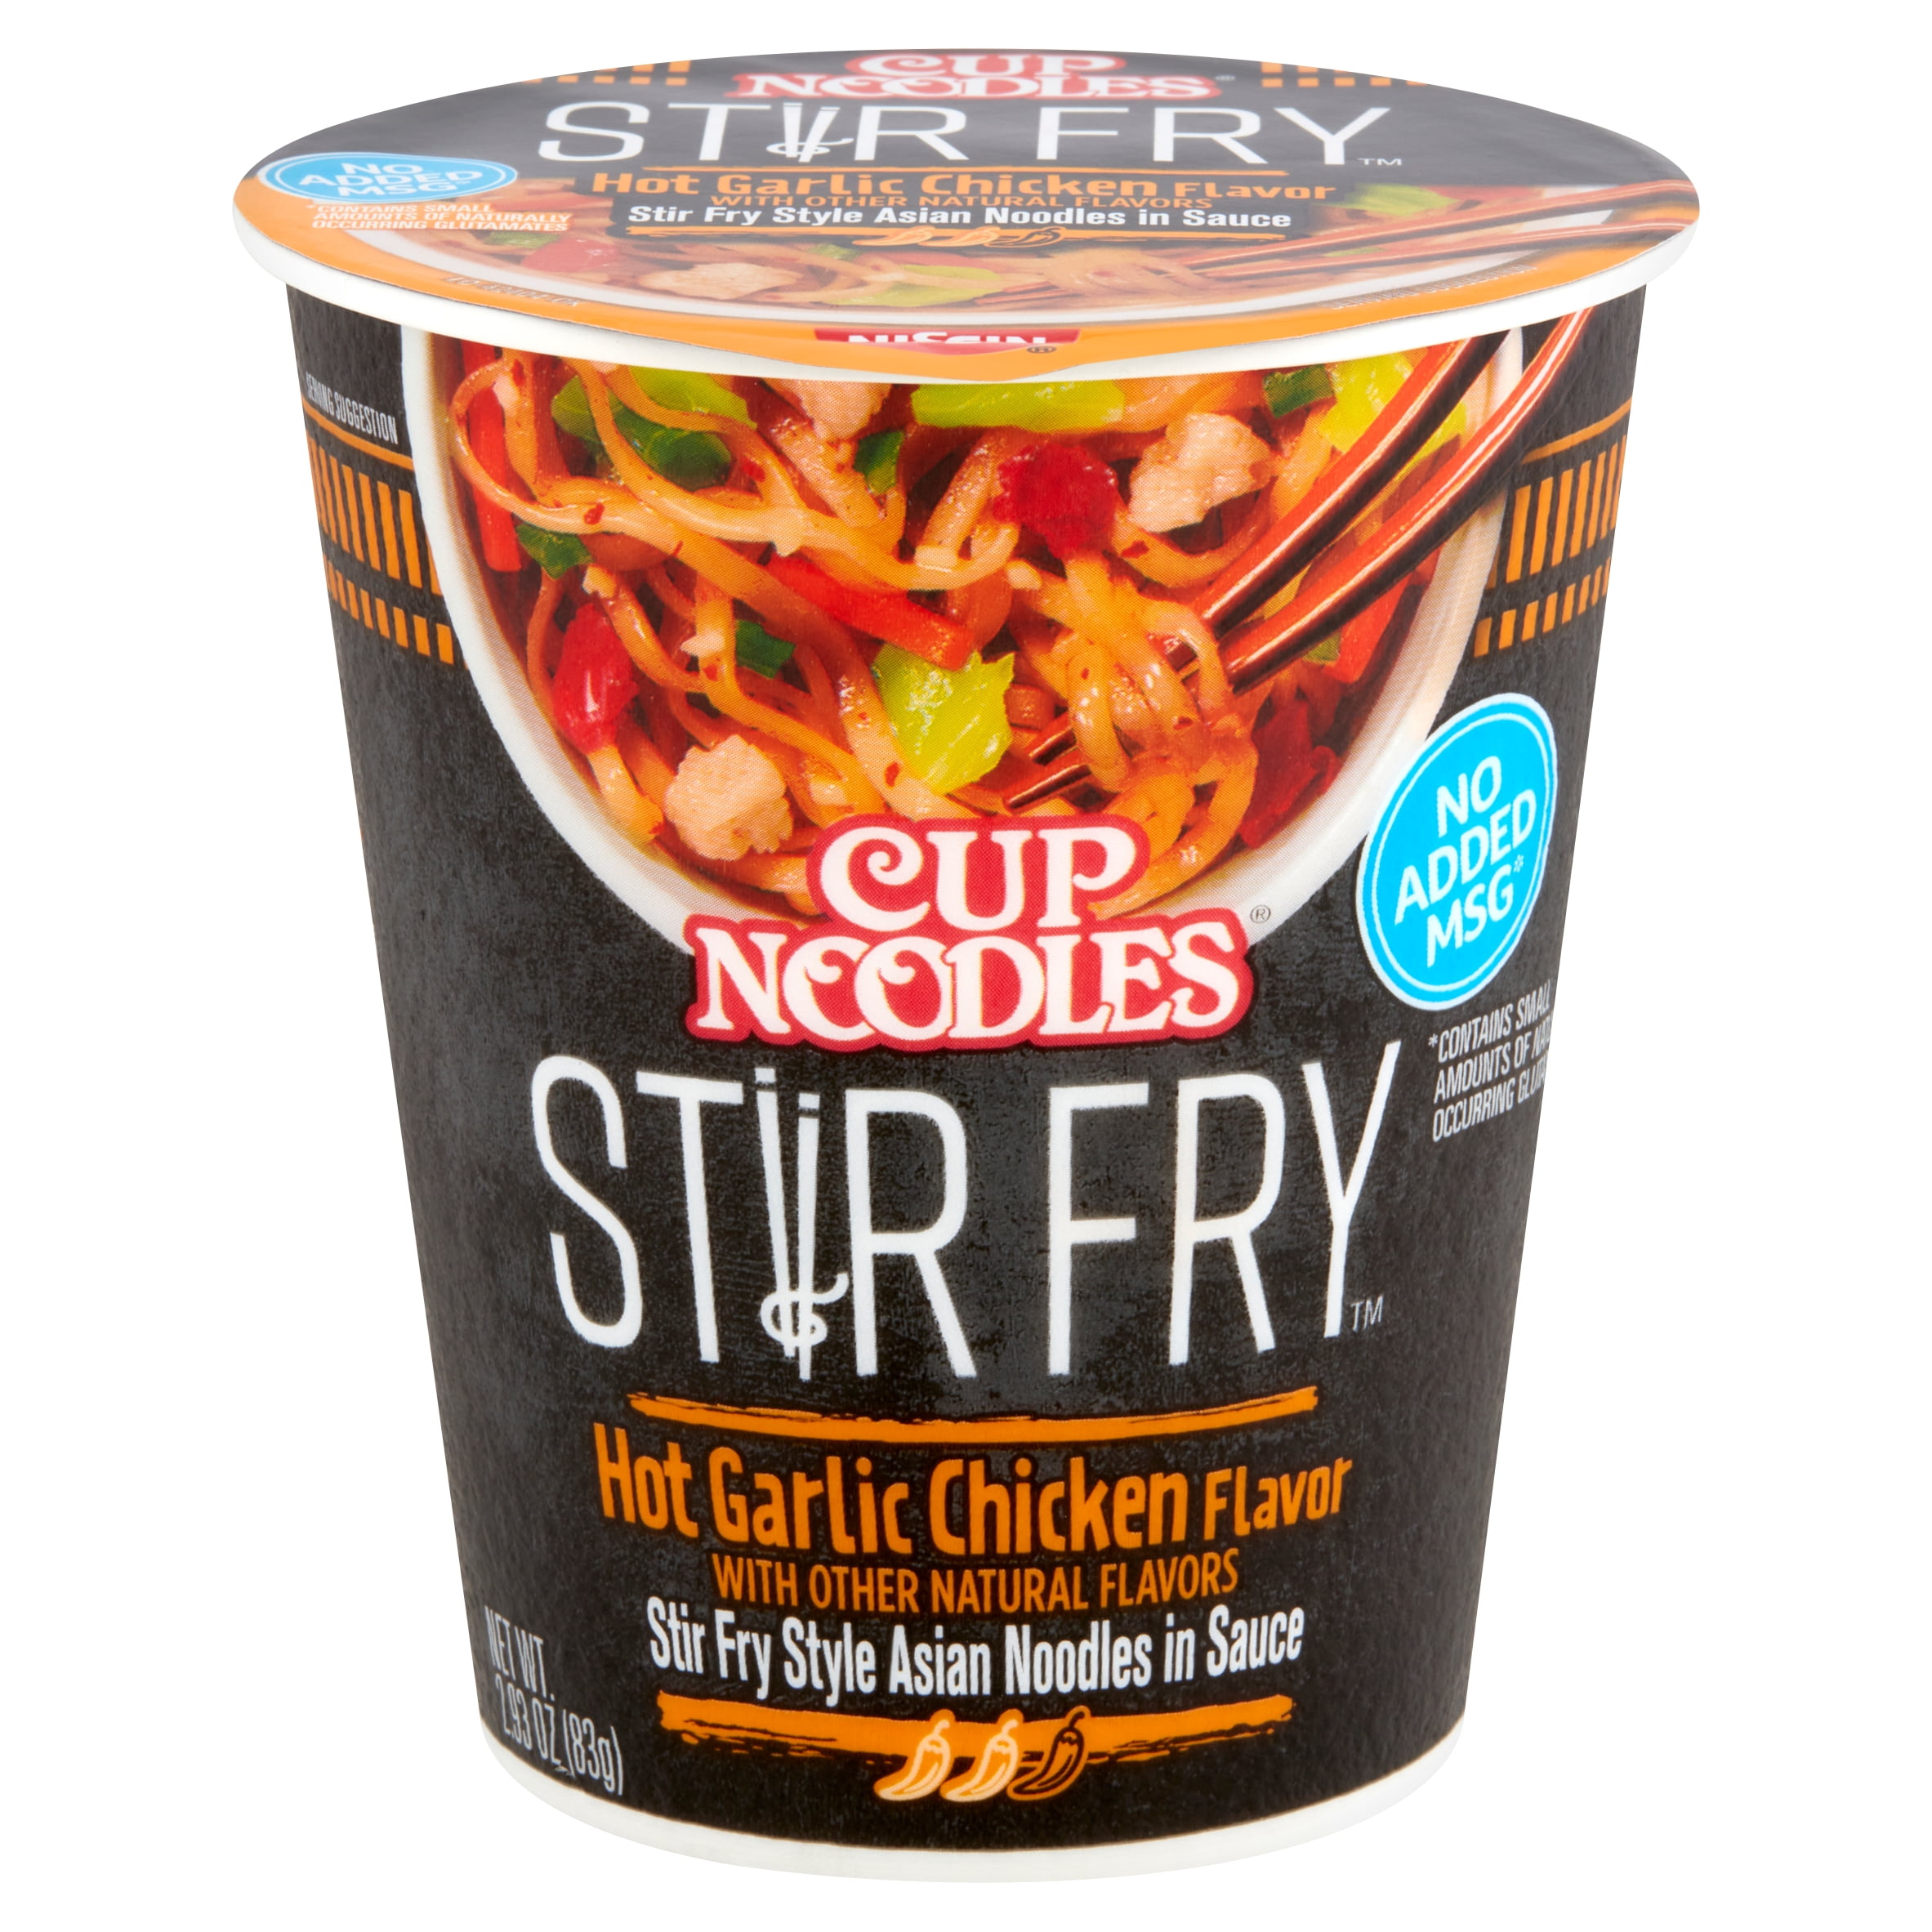 Today Buy Nissin Cup Noodles Hot Garlic Chicken Flavor Stir Fry Style Asian...